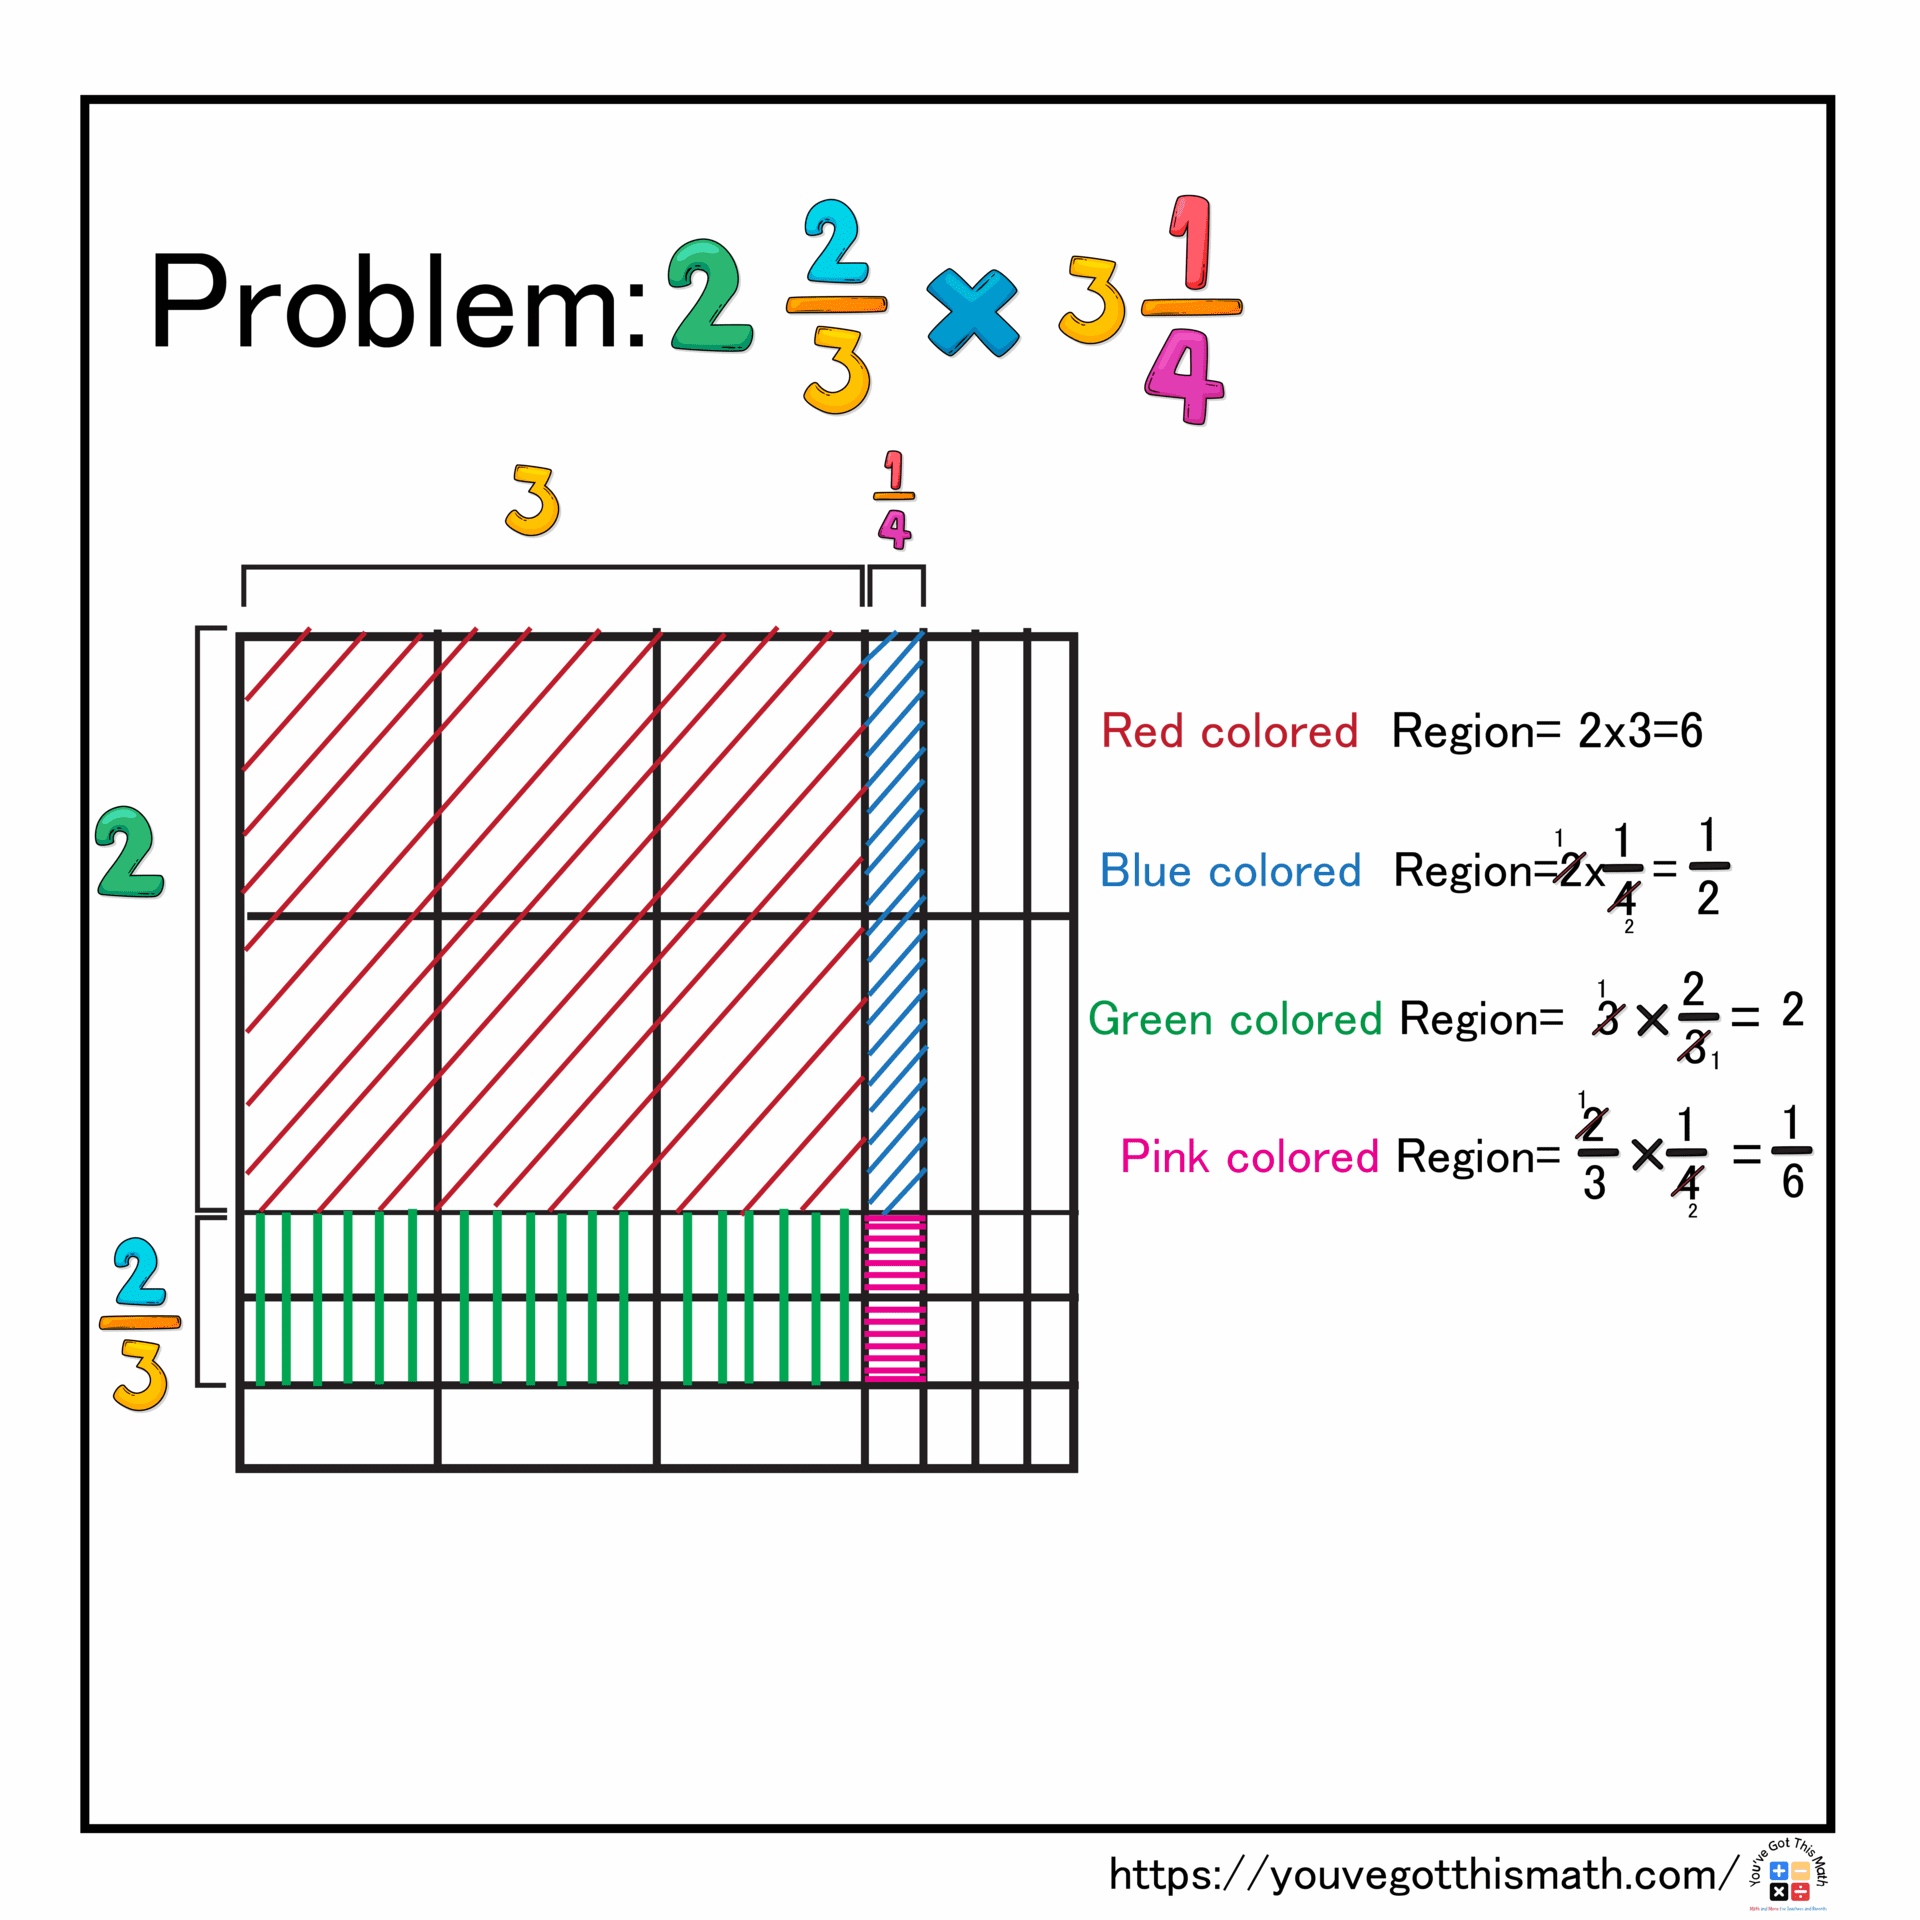 Multiplying Fraction by Fraction and Coloring the Specific Region